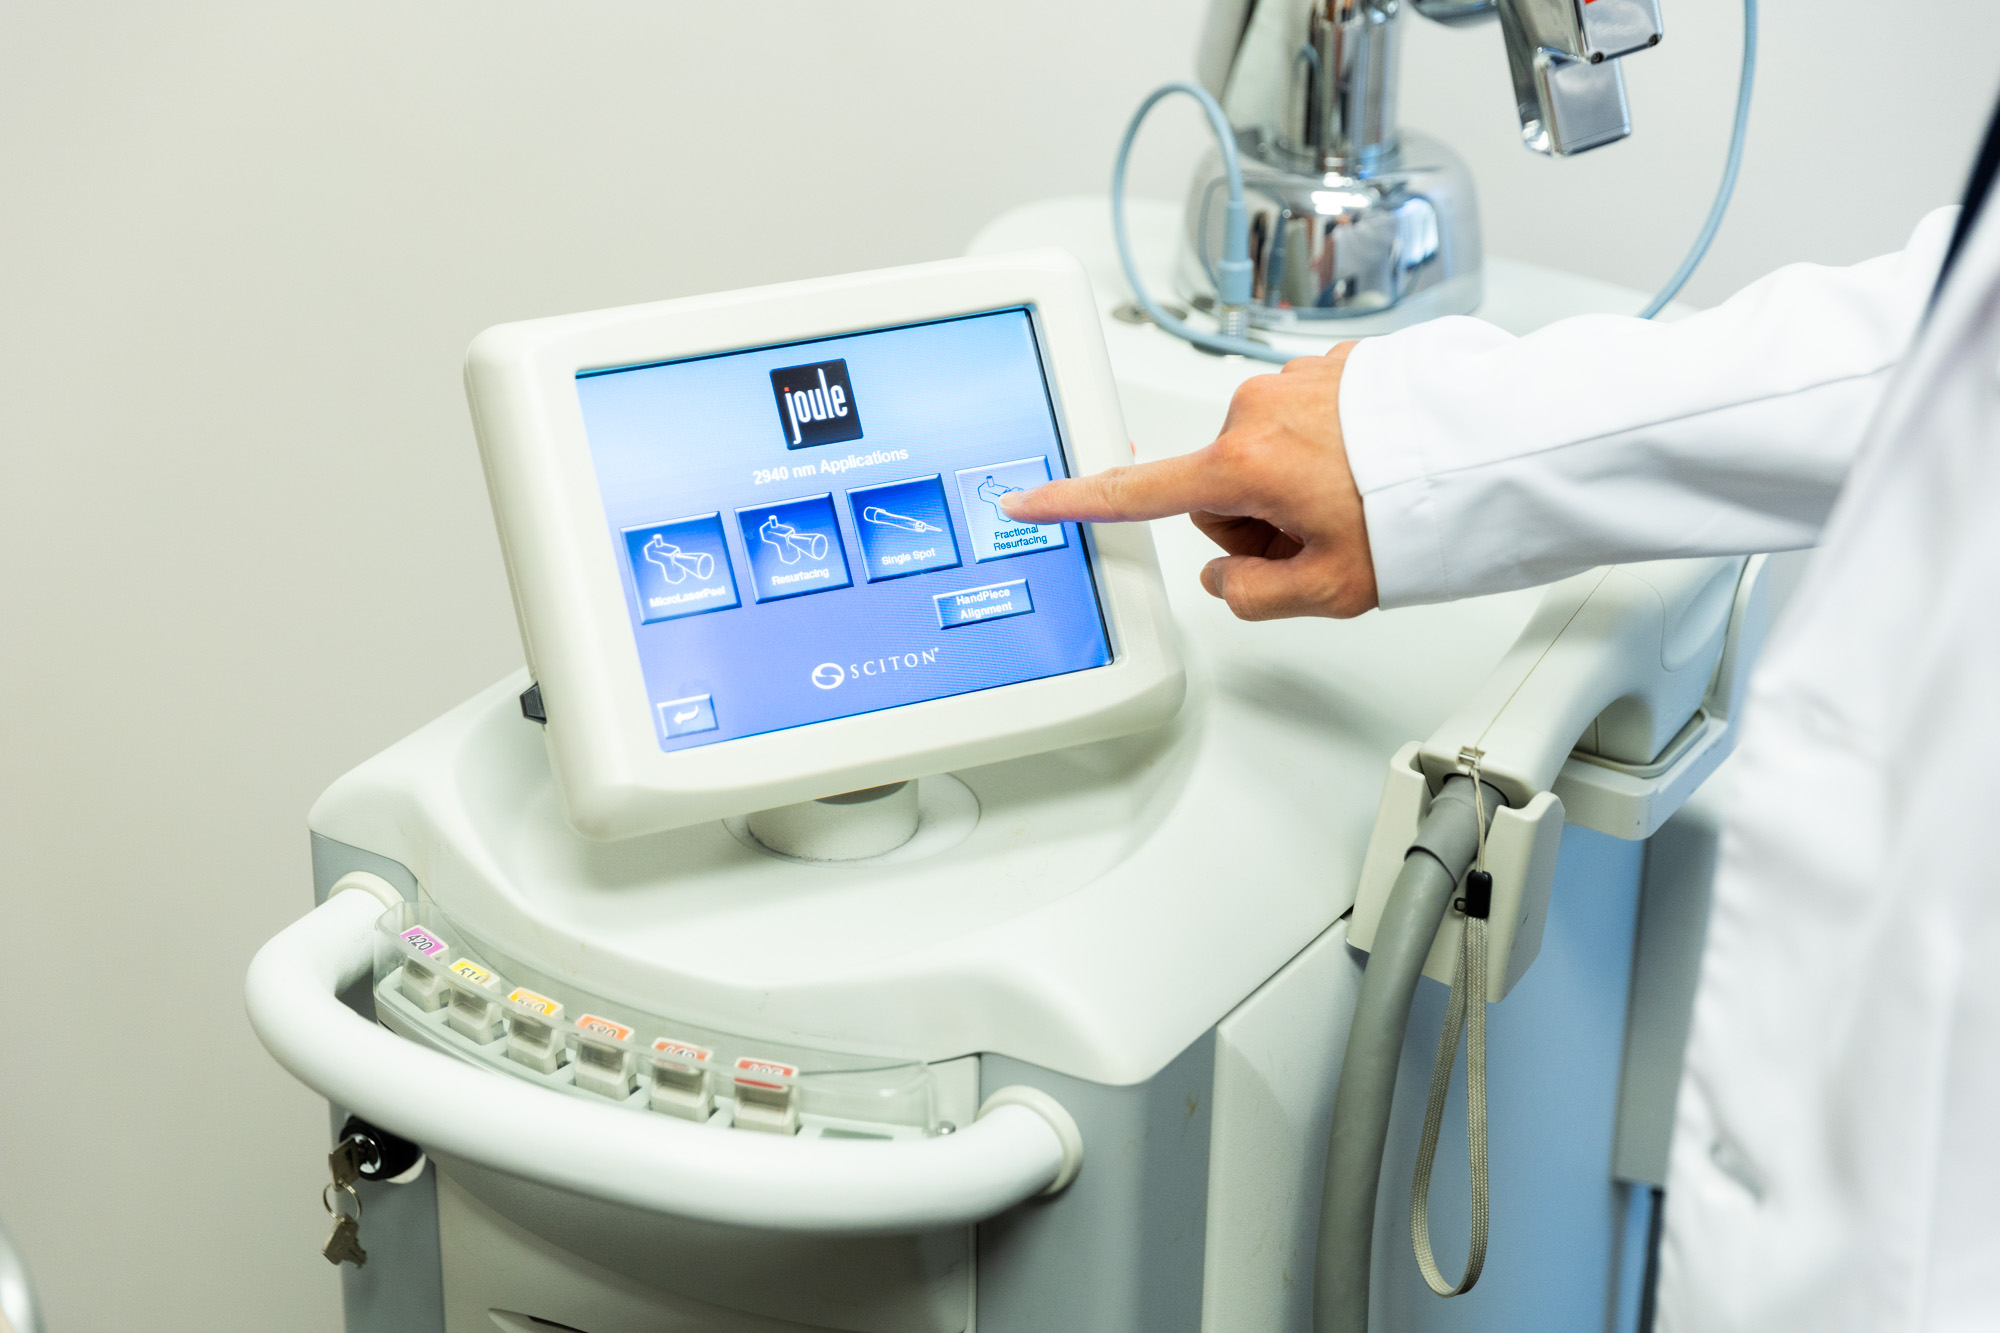 A doctor's hand points to a setting on a machine. The screen reads "joule" and has four different settings.